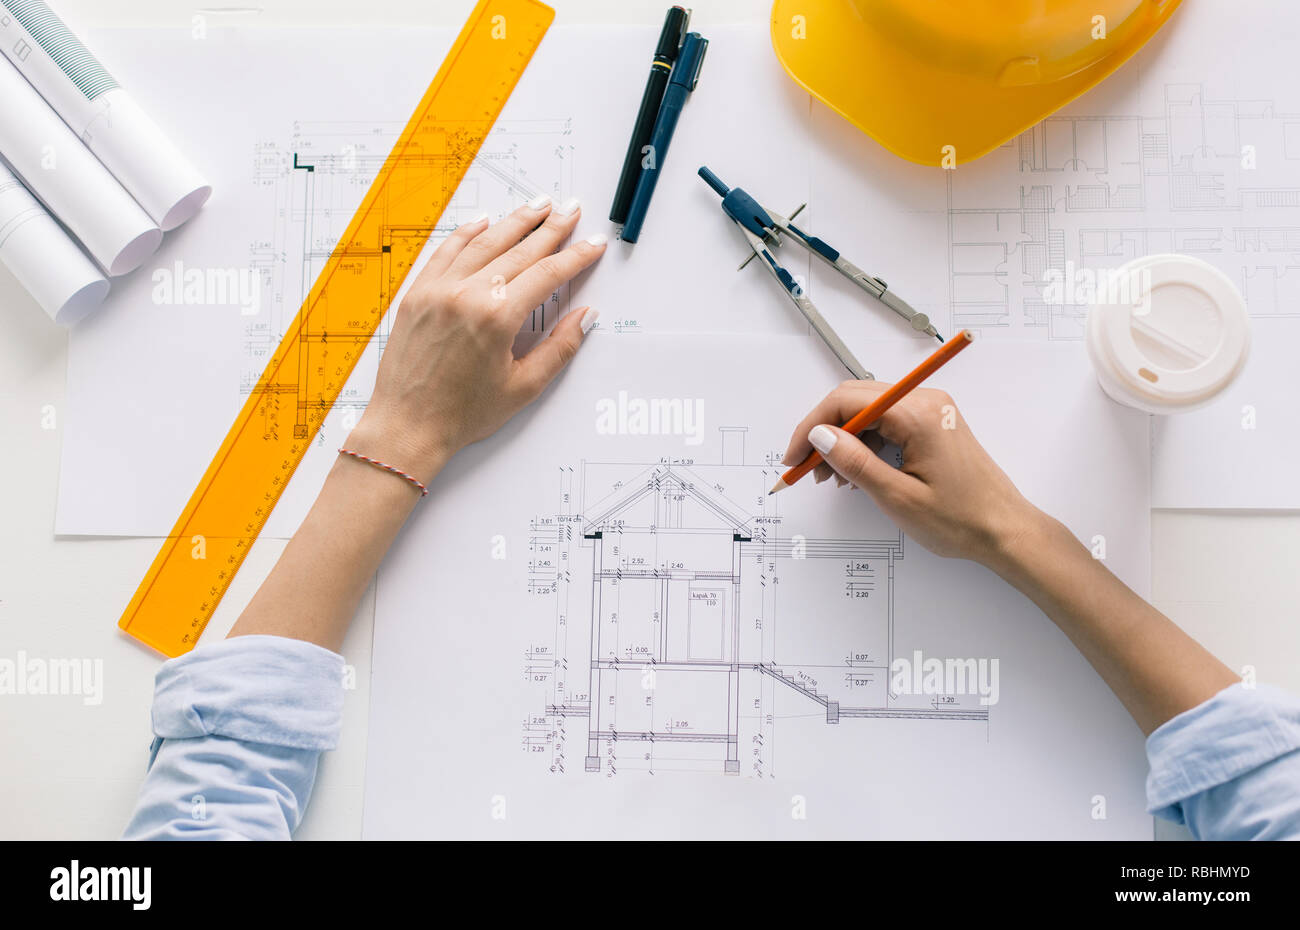 Architect drawing blueprints. Architectural/engineering project concept Stock Photo